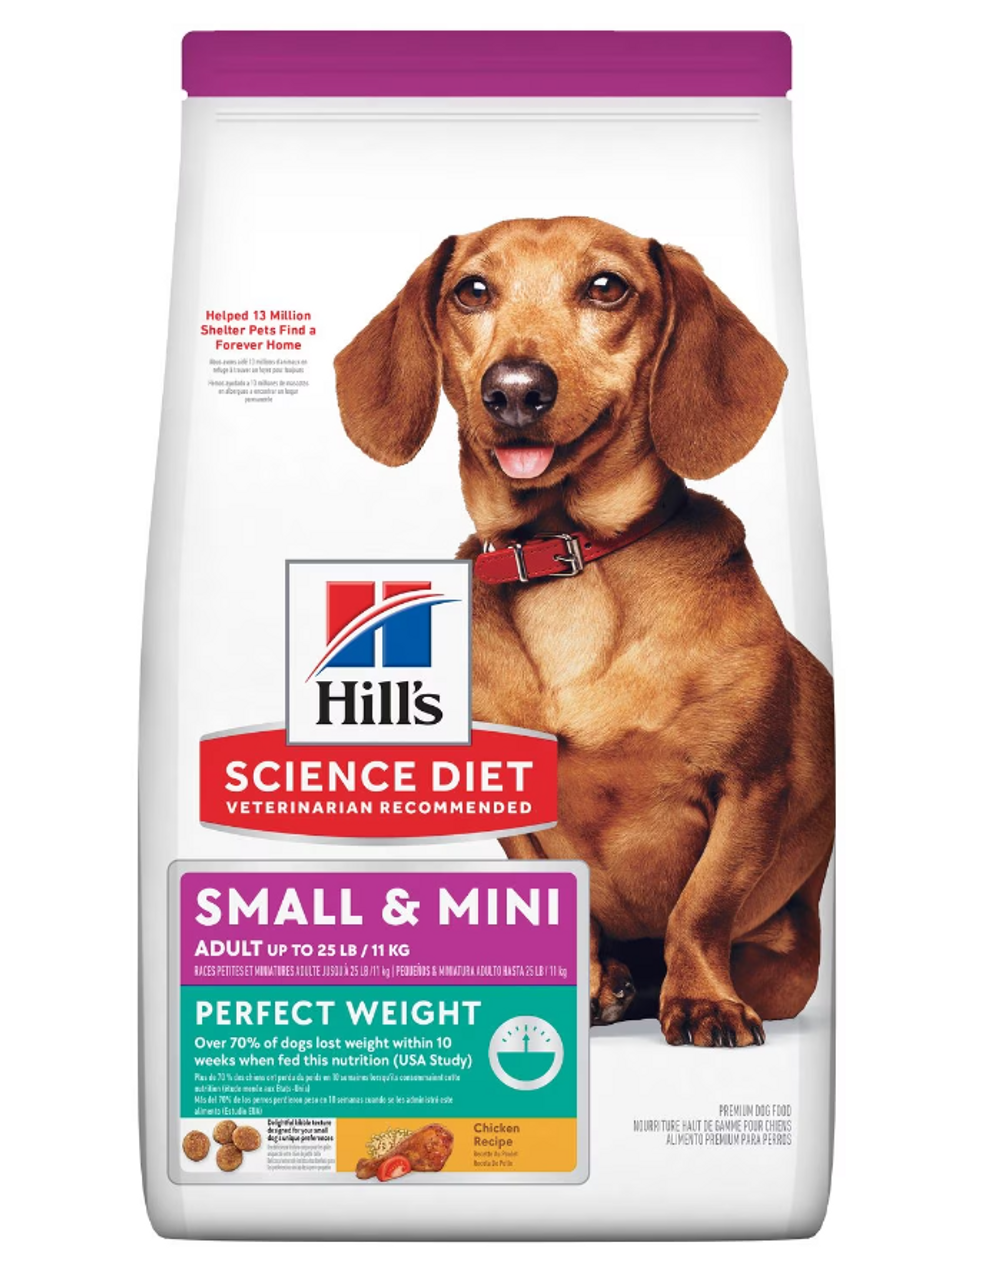 Hill's Science Diet Adult Perfect Weight Small & Mini Chicken Recipe Dry Dog Food, 12.5 lbs.